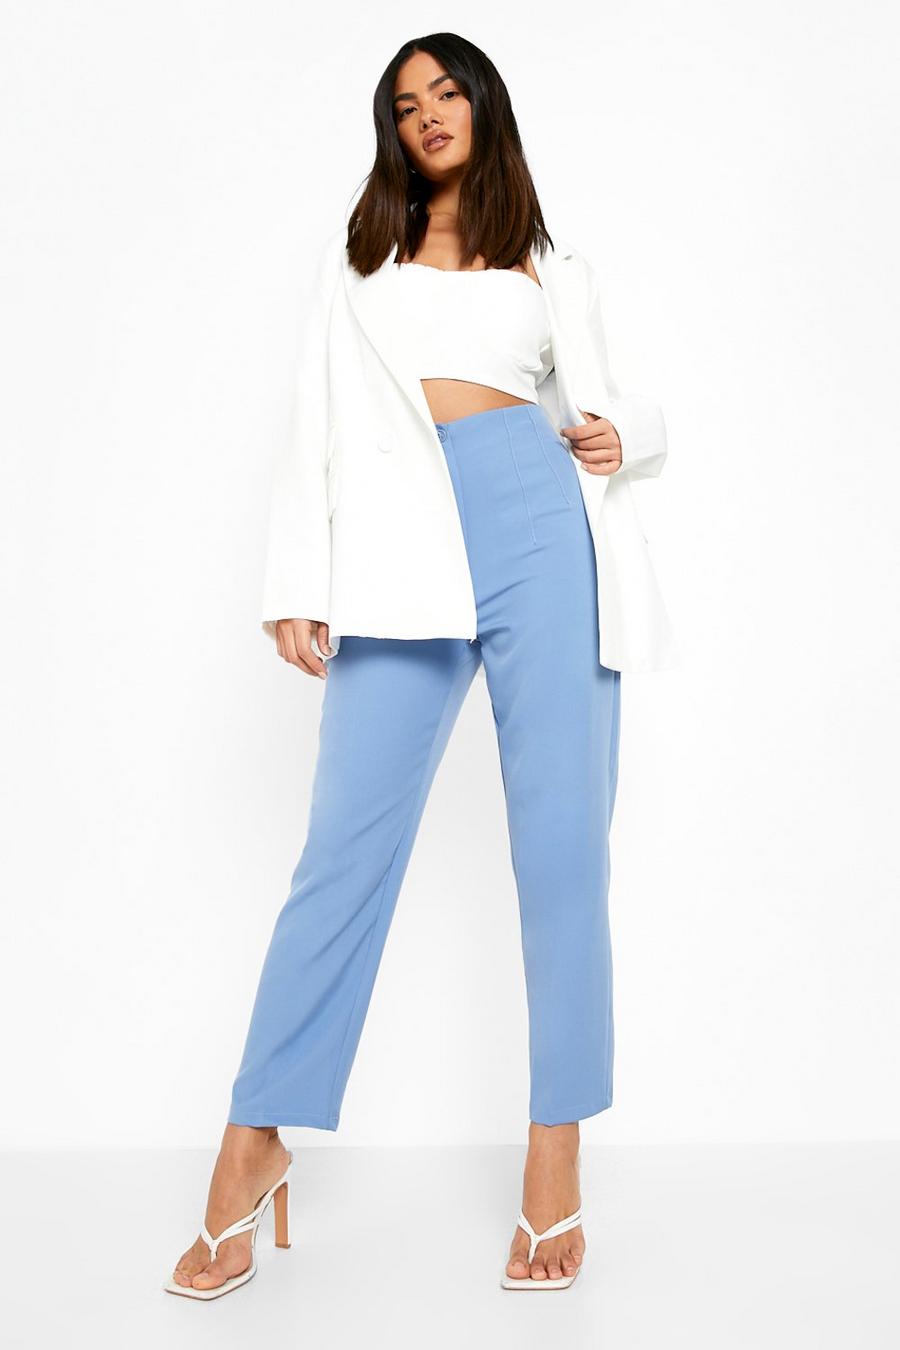 Pale blue azzurro High Waisted Tailored Cigarette Trouser 